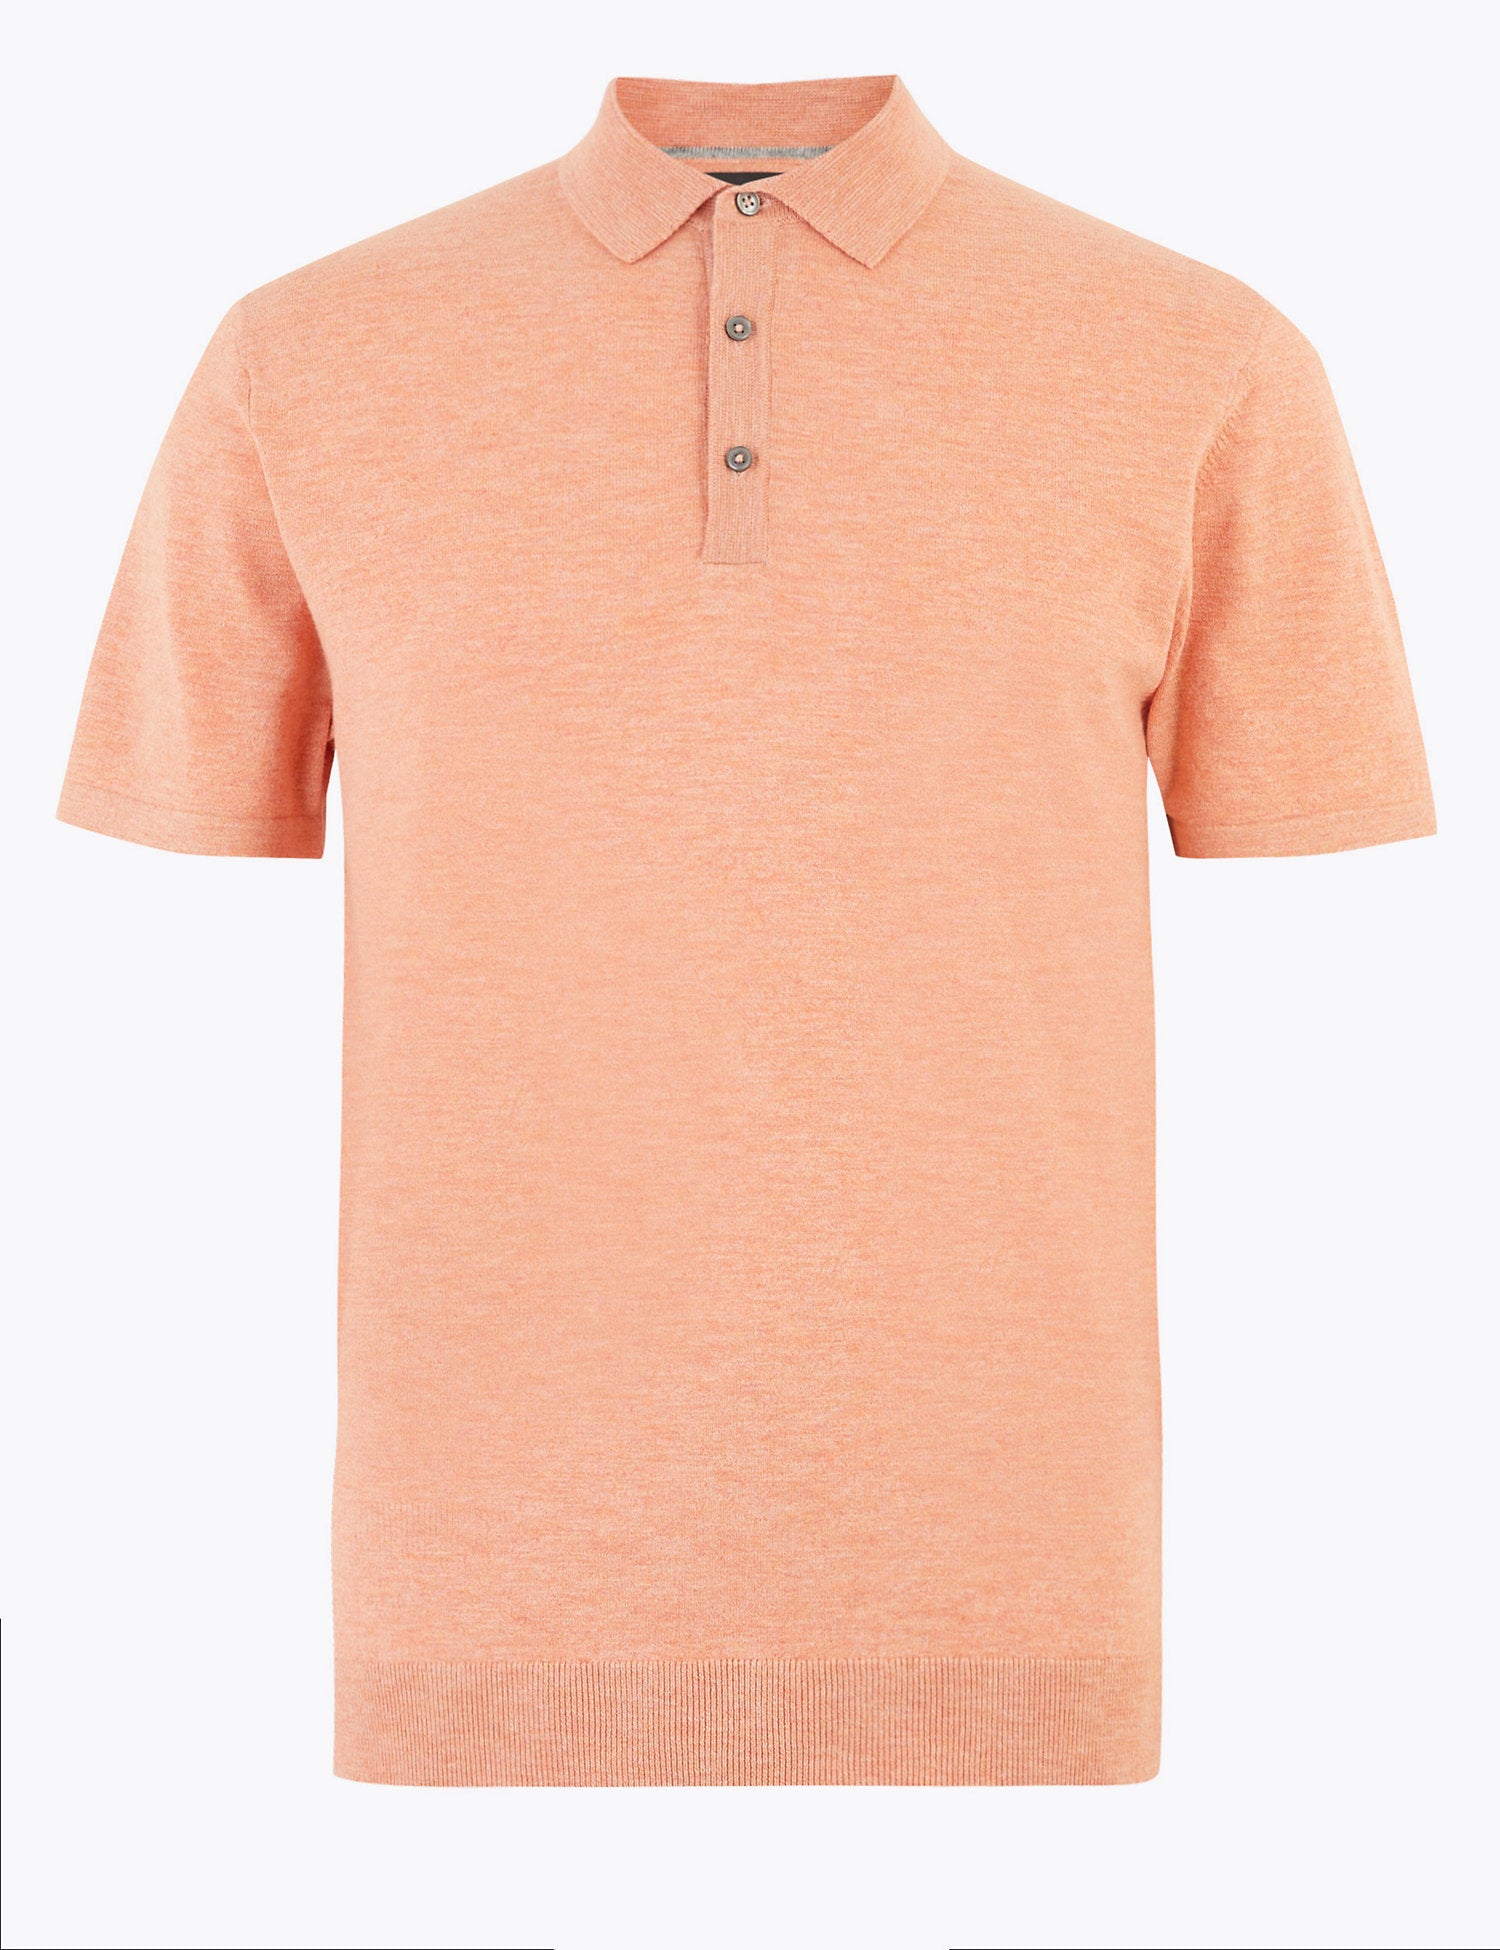 Cotton Short Sleeve Knitted Polo Shirt